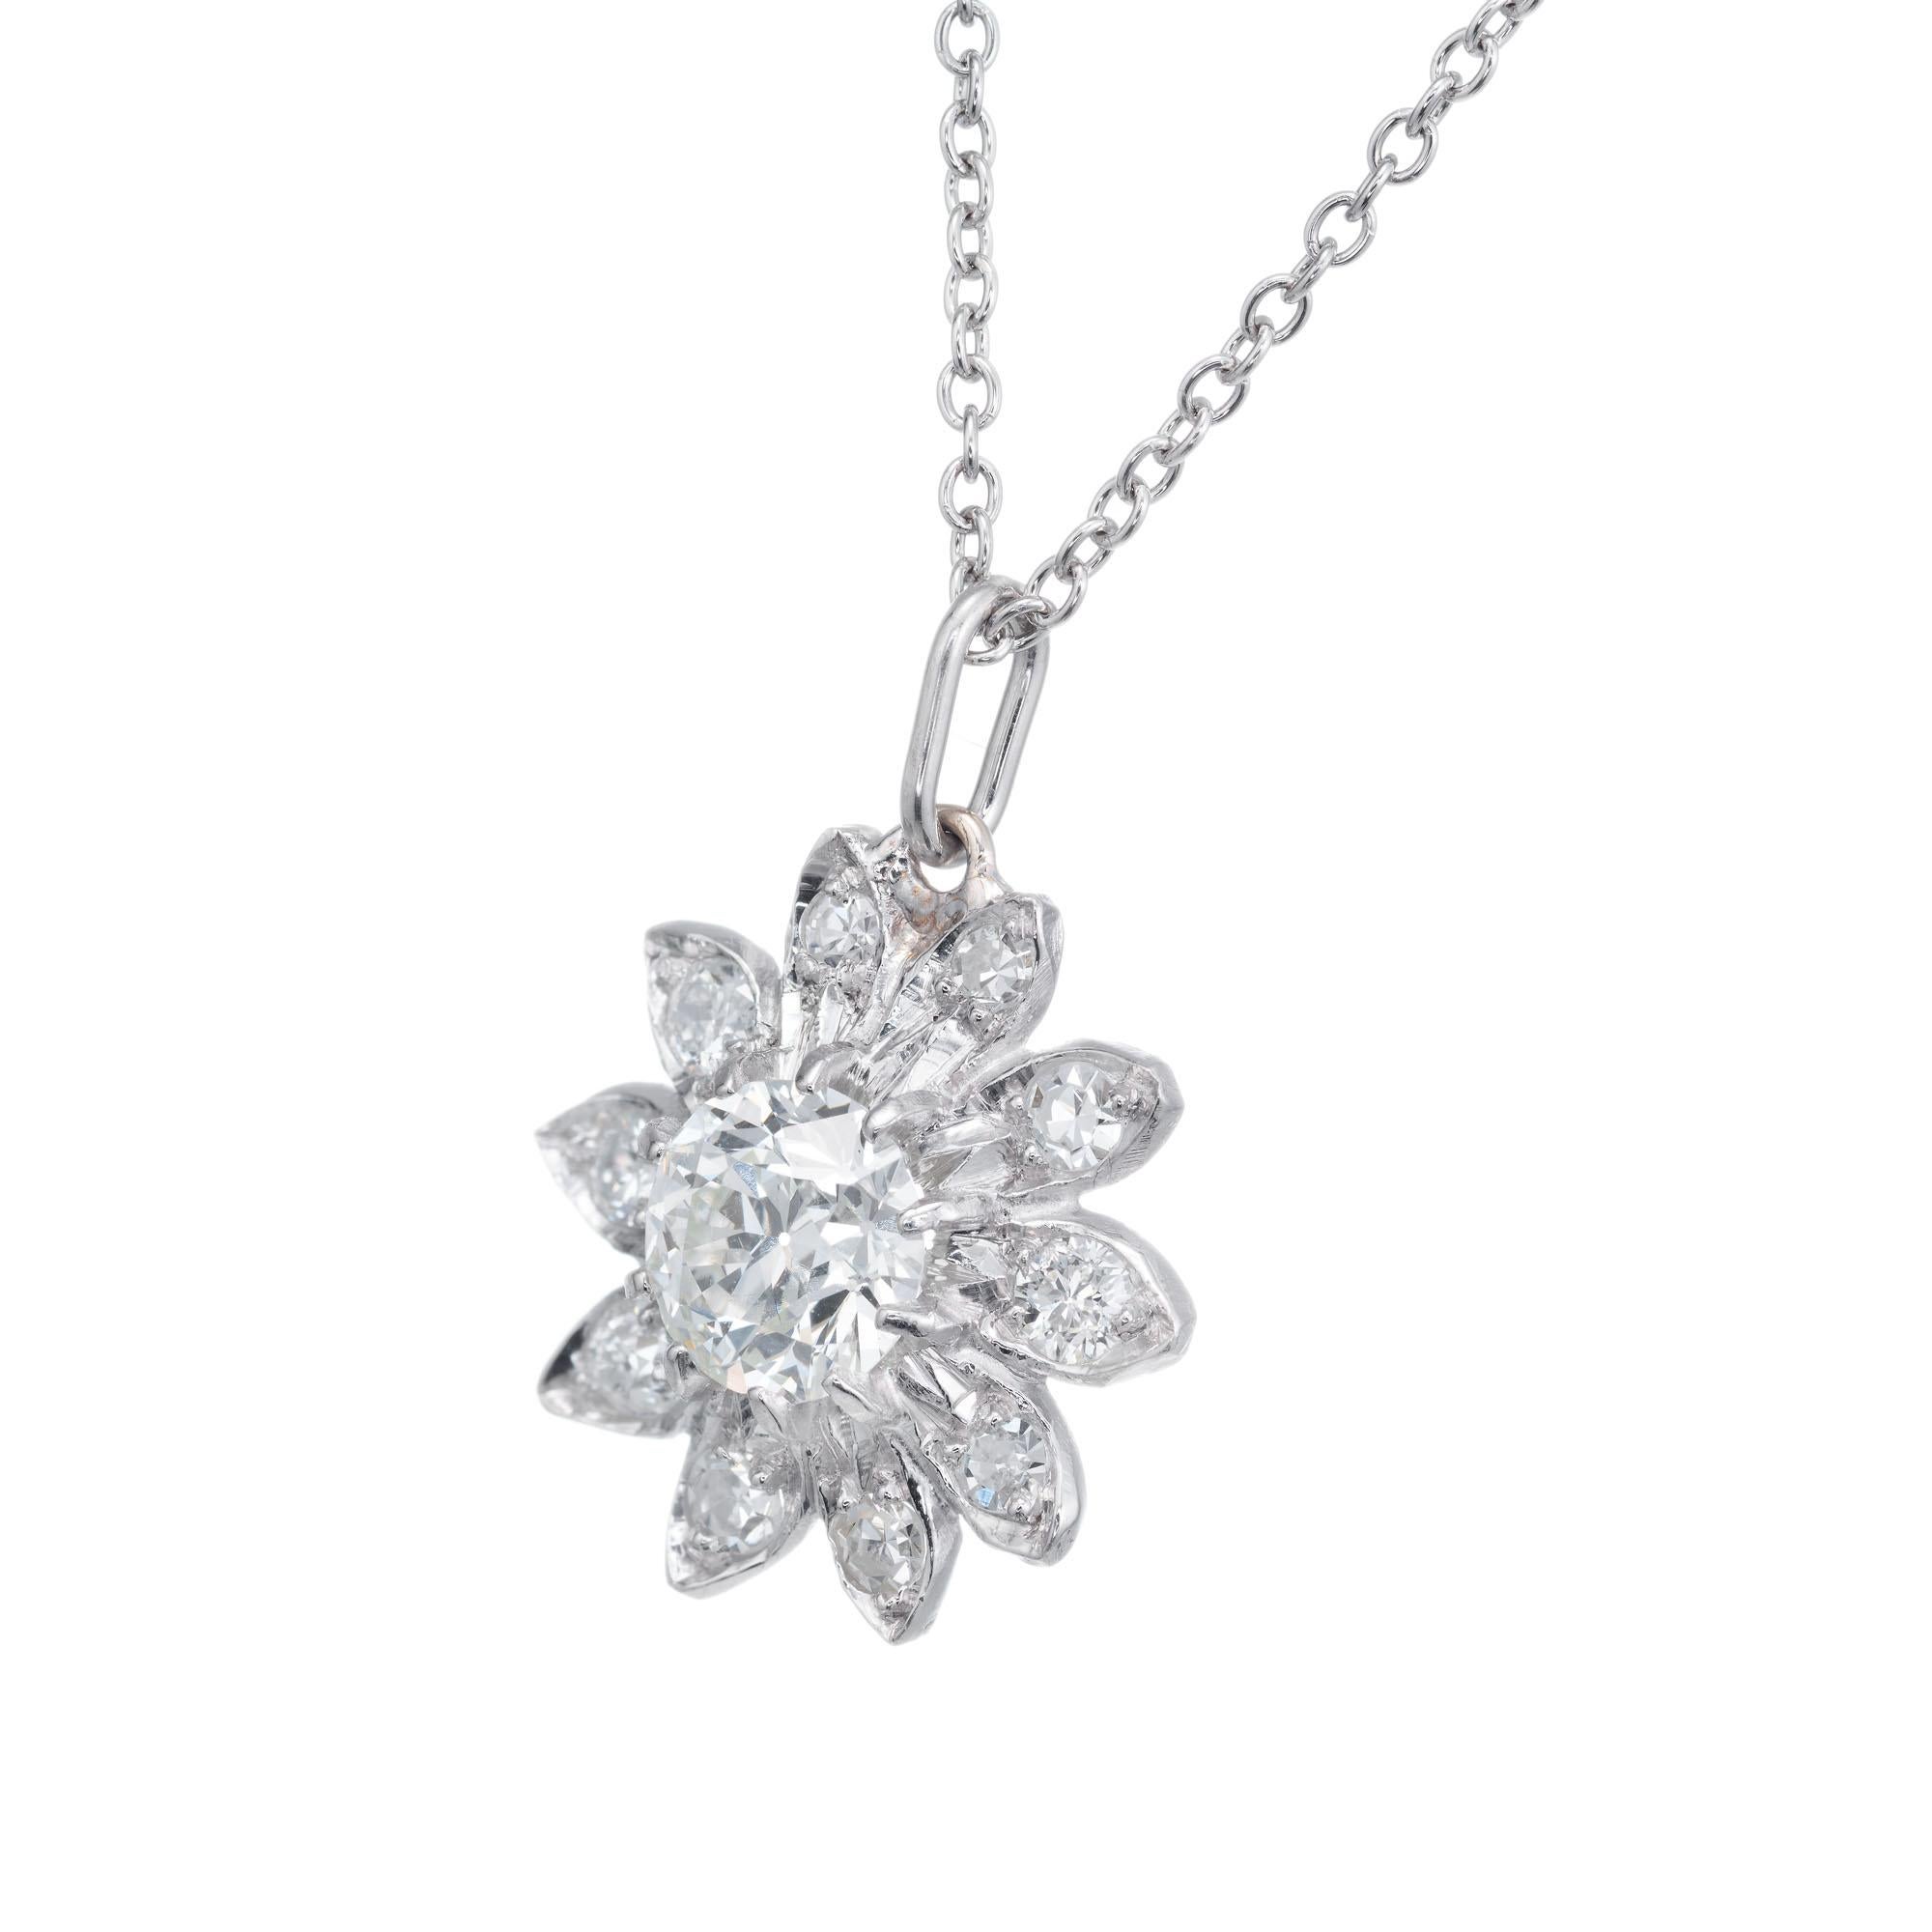 Art Deco Old European cut diamond flower pendant necklace in 14k white gold with an 18inch white gold chain. 

1 Old European cur diamond I, SI approx. .50cts
10 single cut diamonds I, VS-SI approx. .30cts
14k white gold 
Tested: 14k
4.0 grams
Top